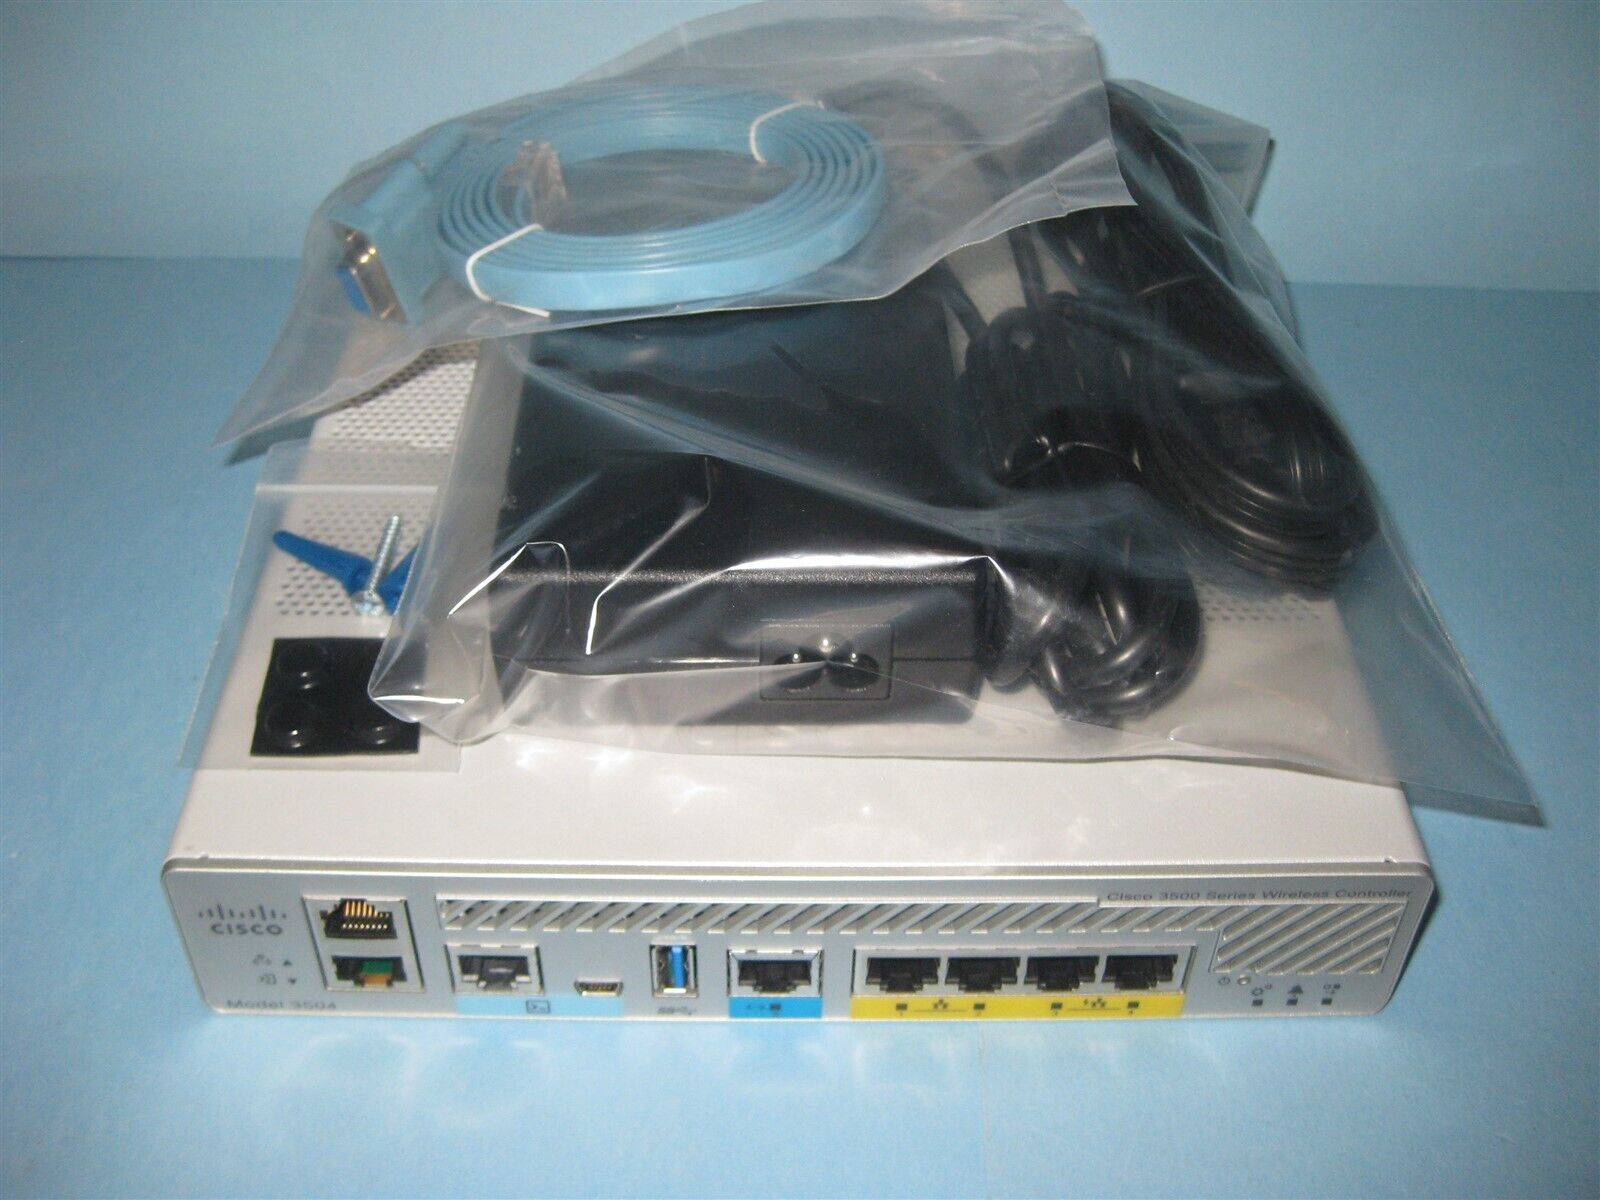 Cisco AIR-CT3504-K9 Aironet 3504 Wireless LAN Controller with AC Adapter